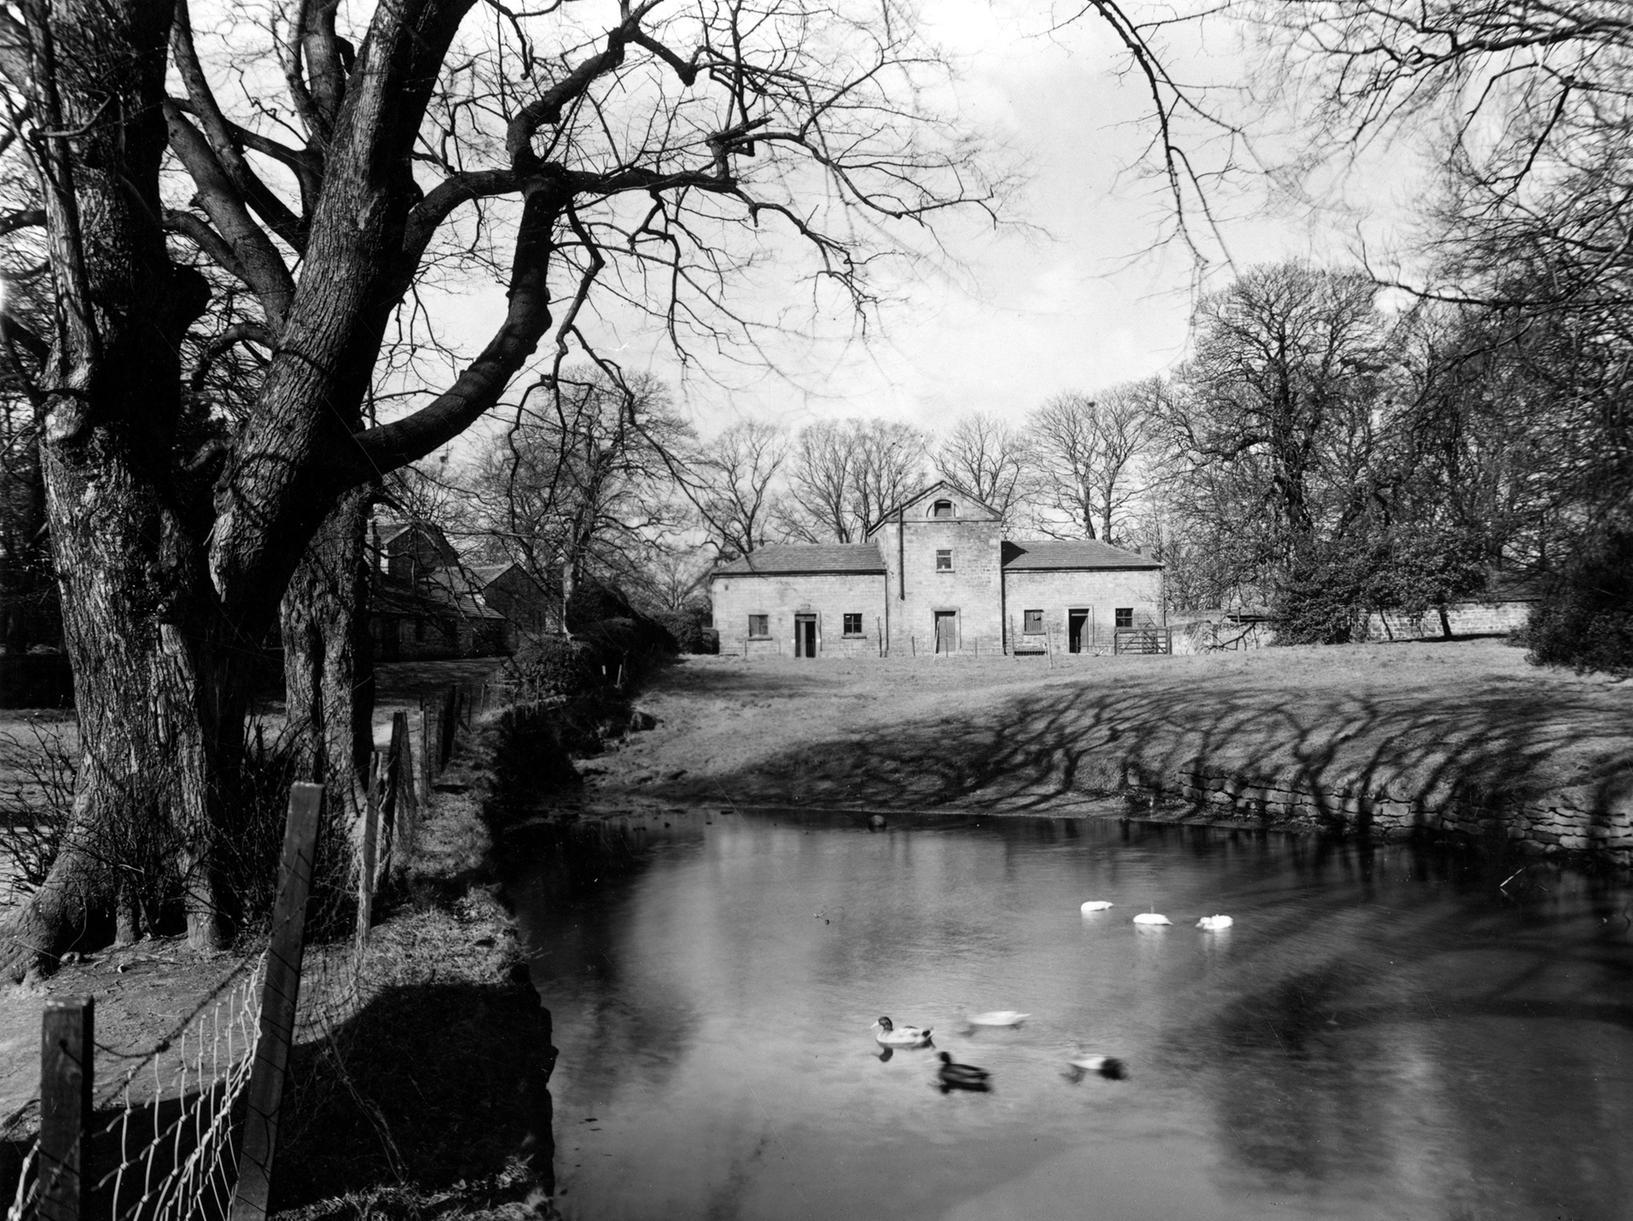 The Rectory at Adel. A view of the pond with ducks in, surrounded by grass land near the stone stable block  in the rectory grounds. A tree lined path leads to the back of the rectory itself to the left.